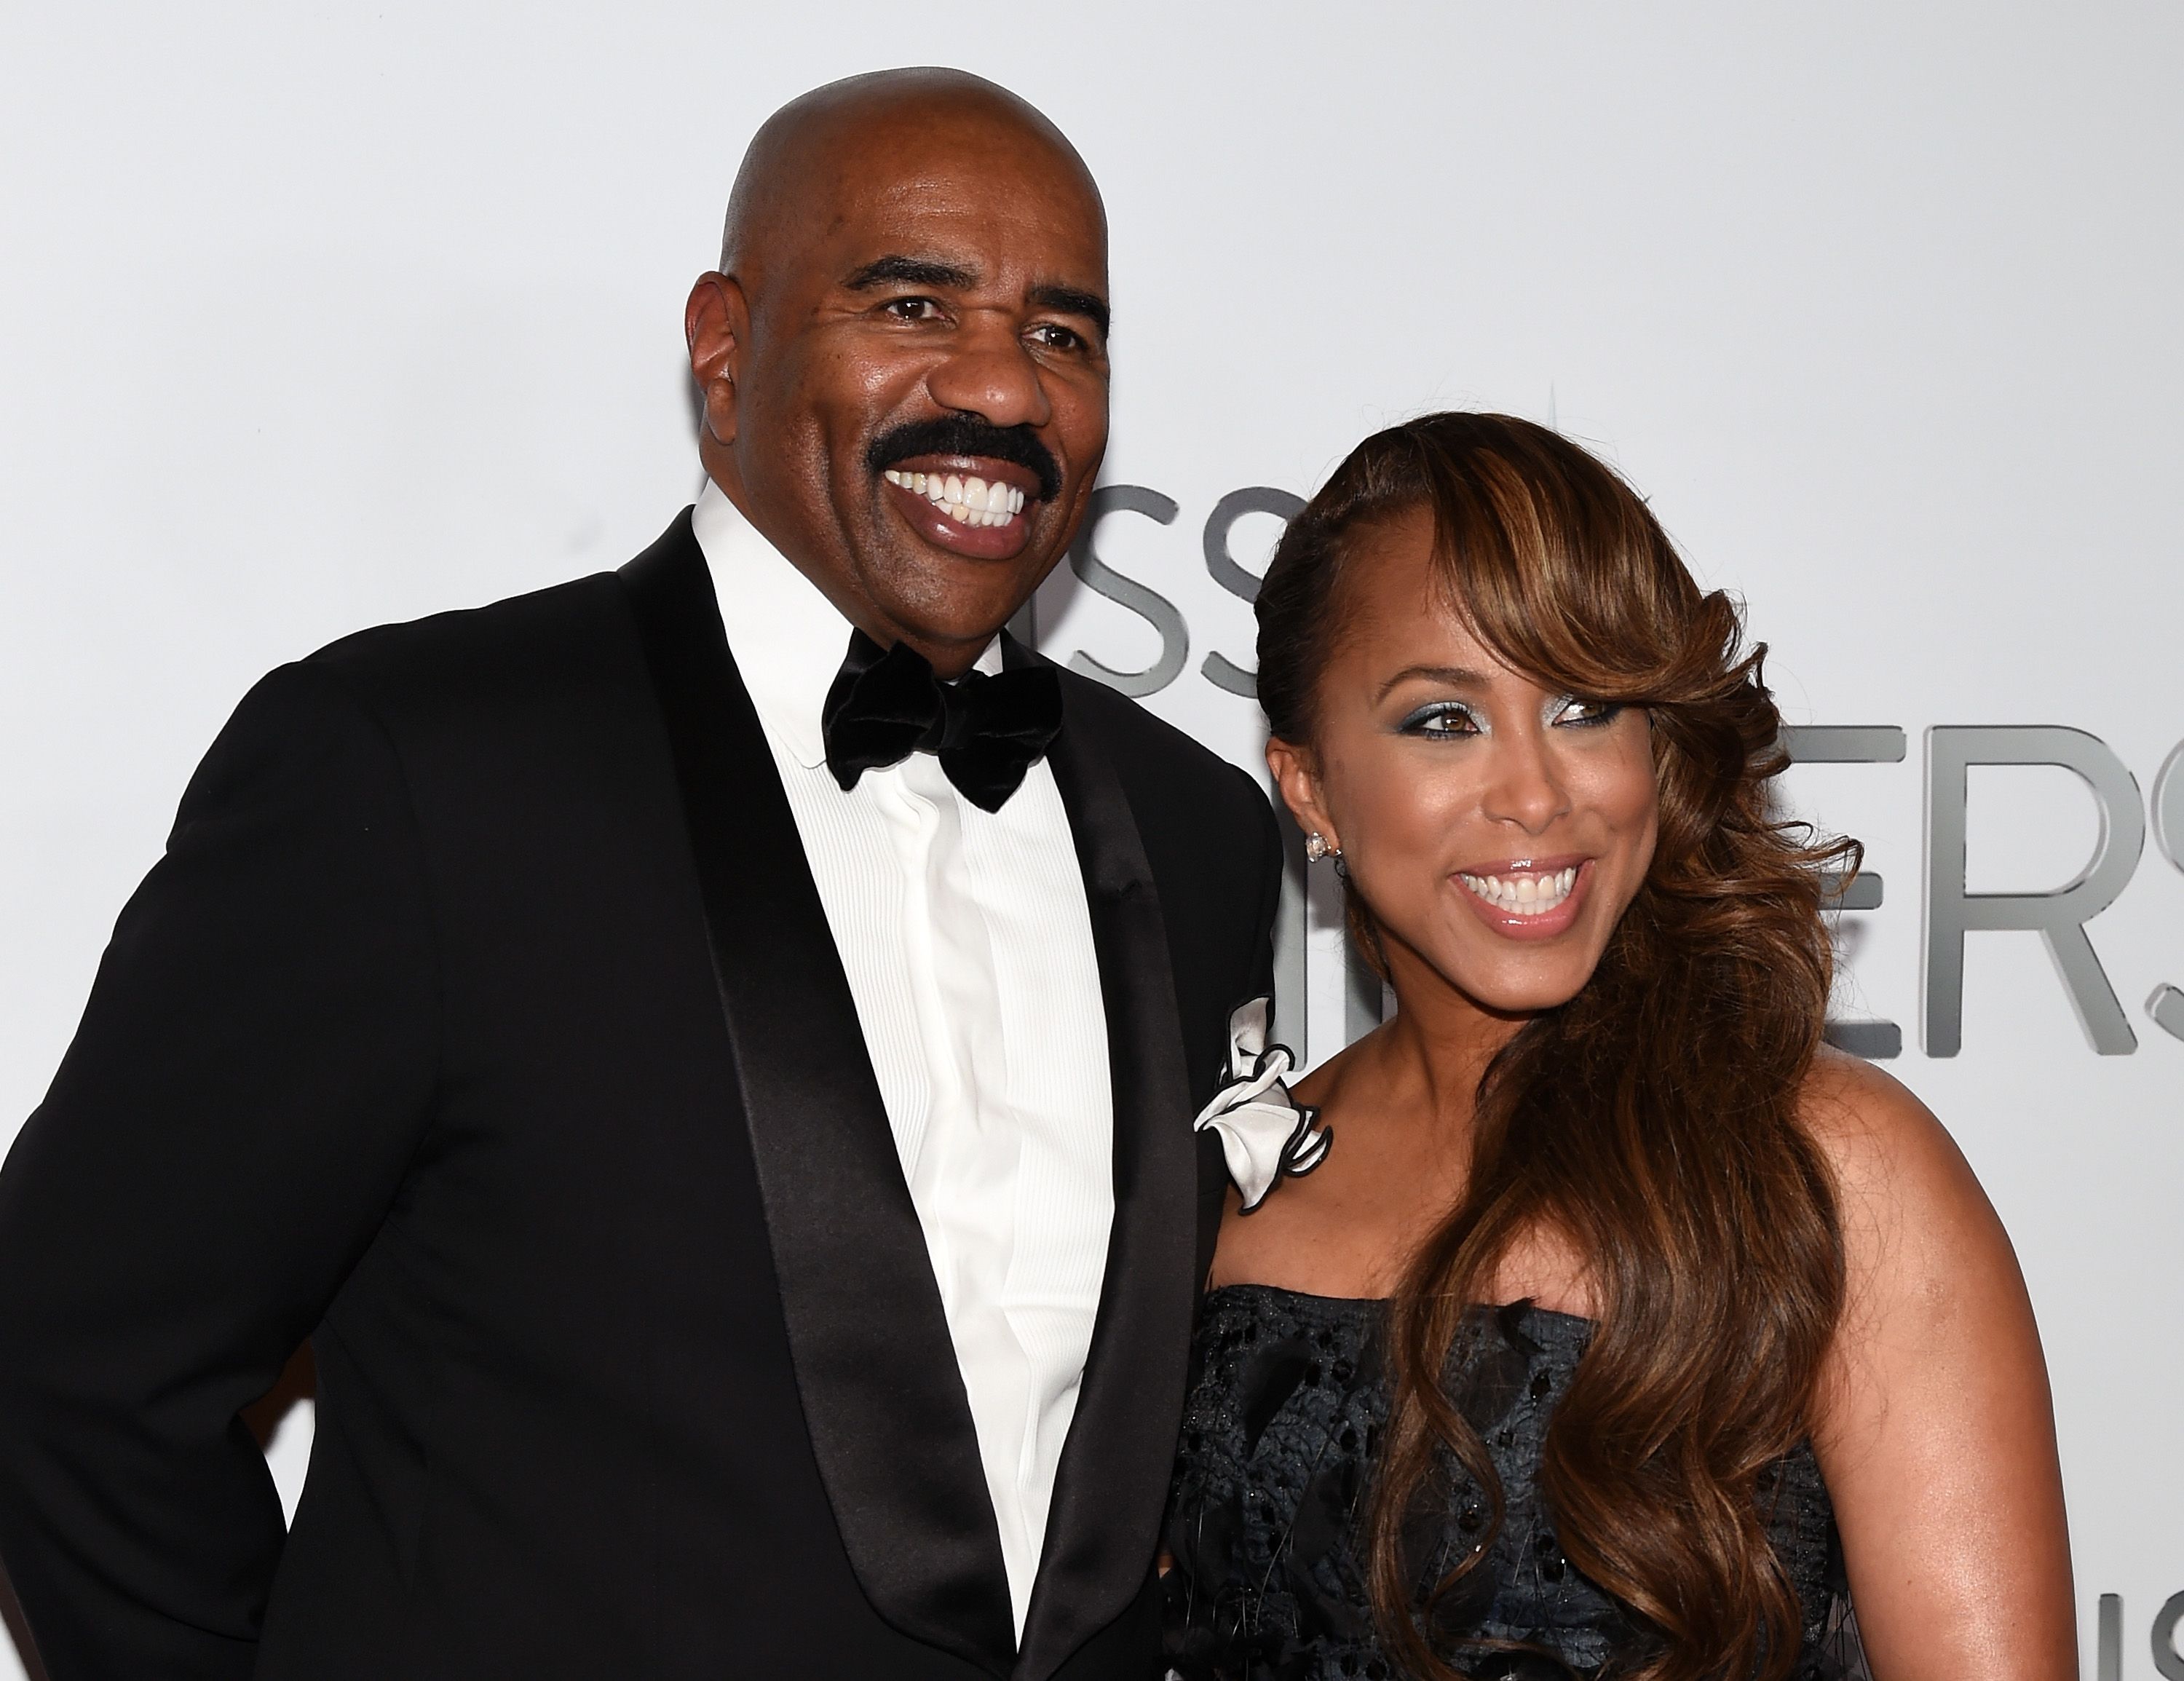 Steve Harvey and his wife Marjorie Harvey at the 2015 Miss Universe Pageant at Planet Hollywood Resort & Casino on December 20, 2015 | Photo: Getty Images